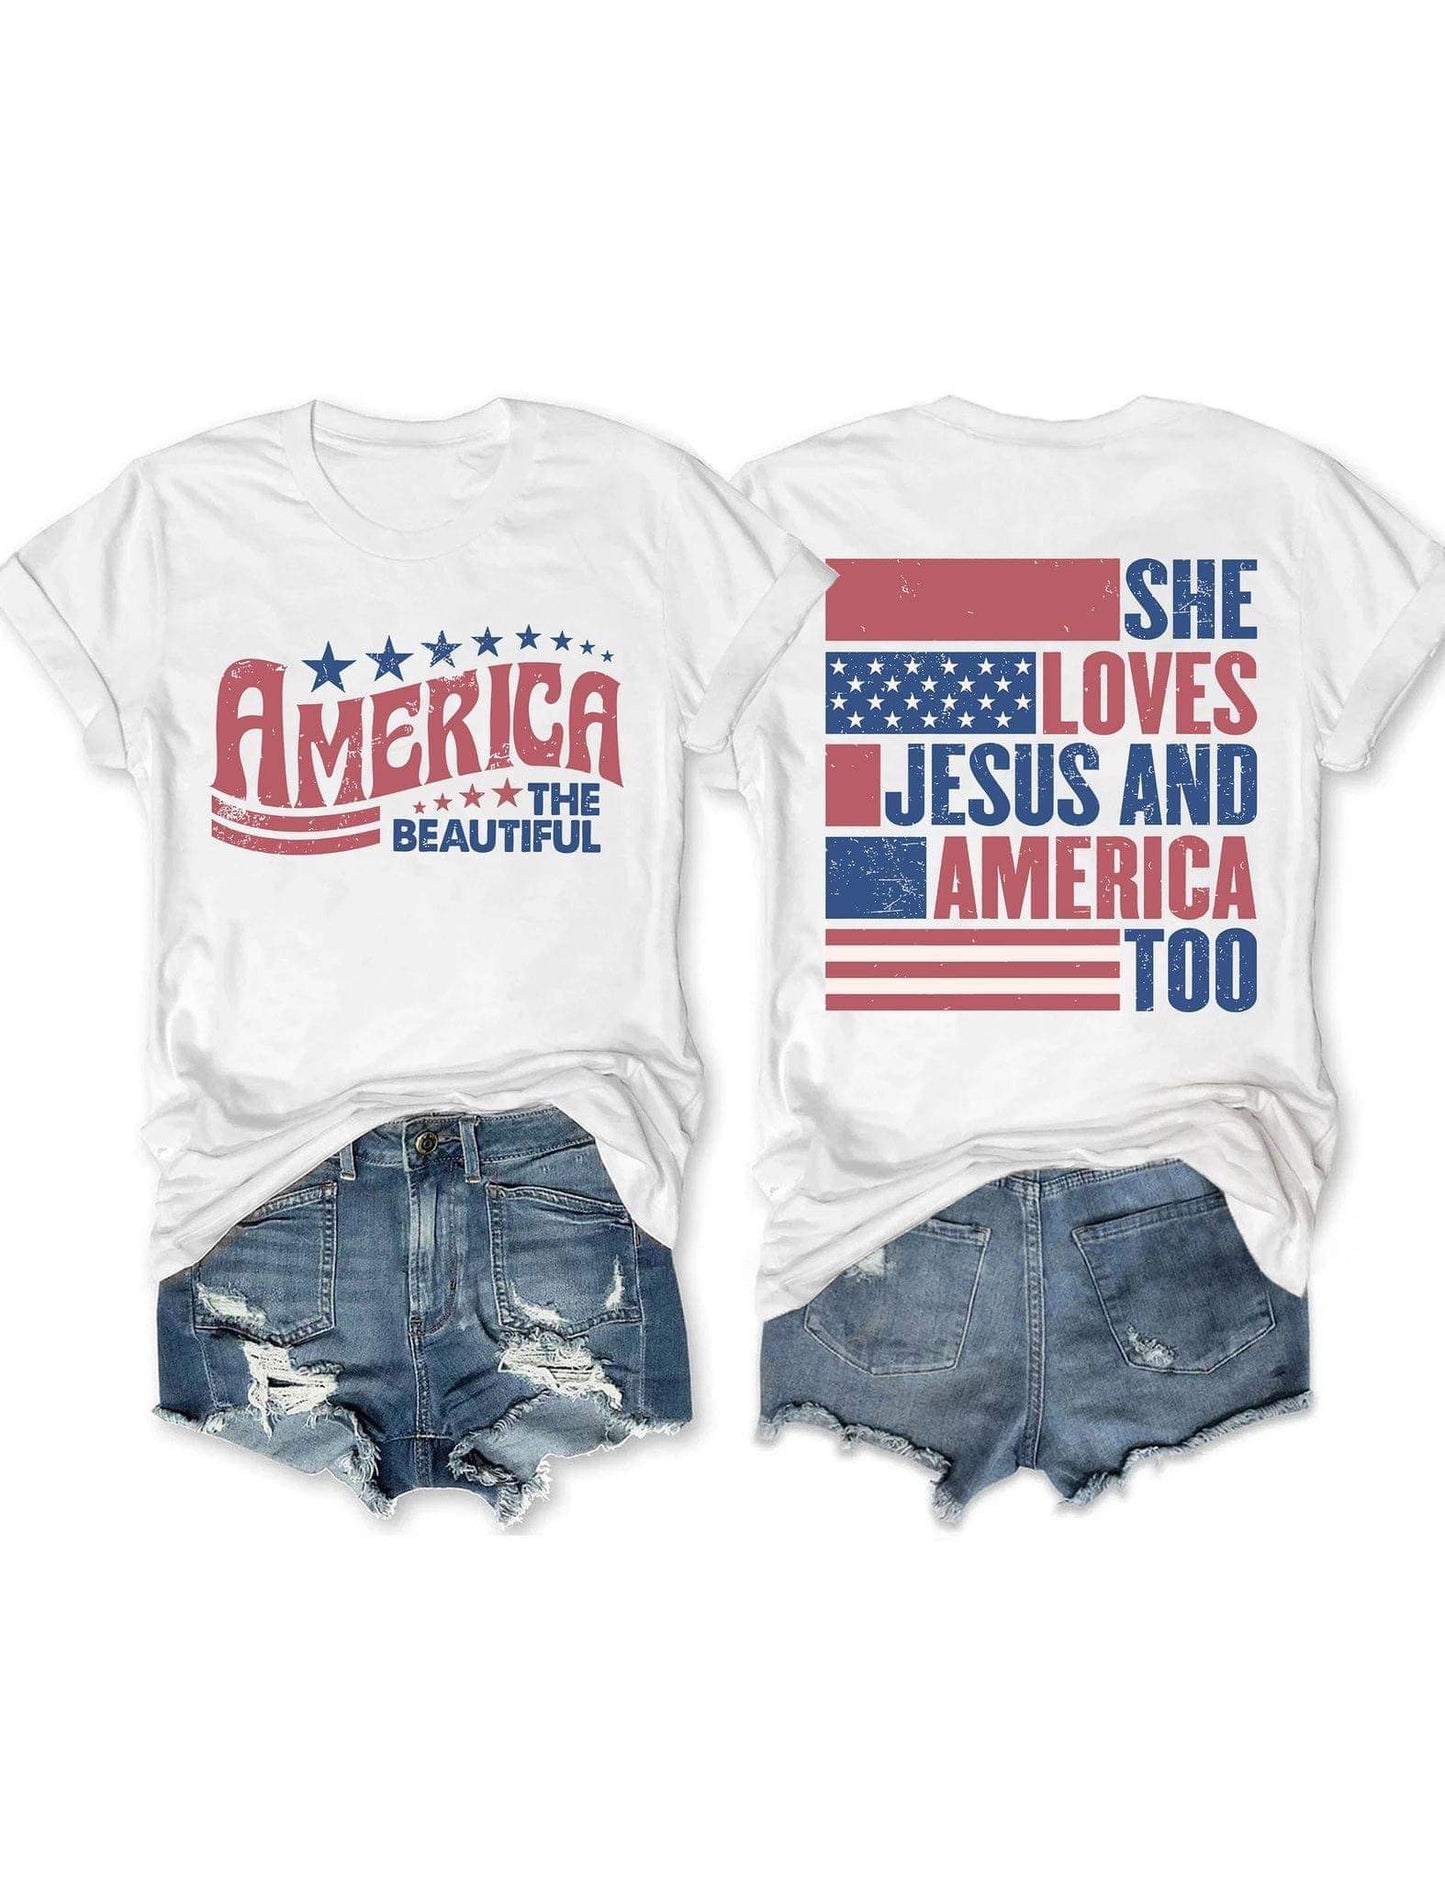 America the Beautiful - She Loves Jesus || July 4th Patriotic Shirt